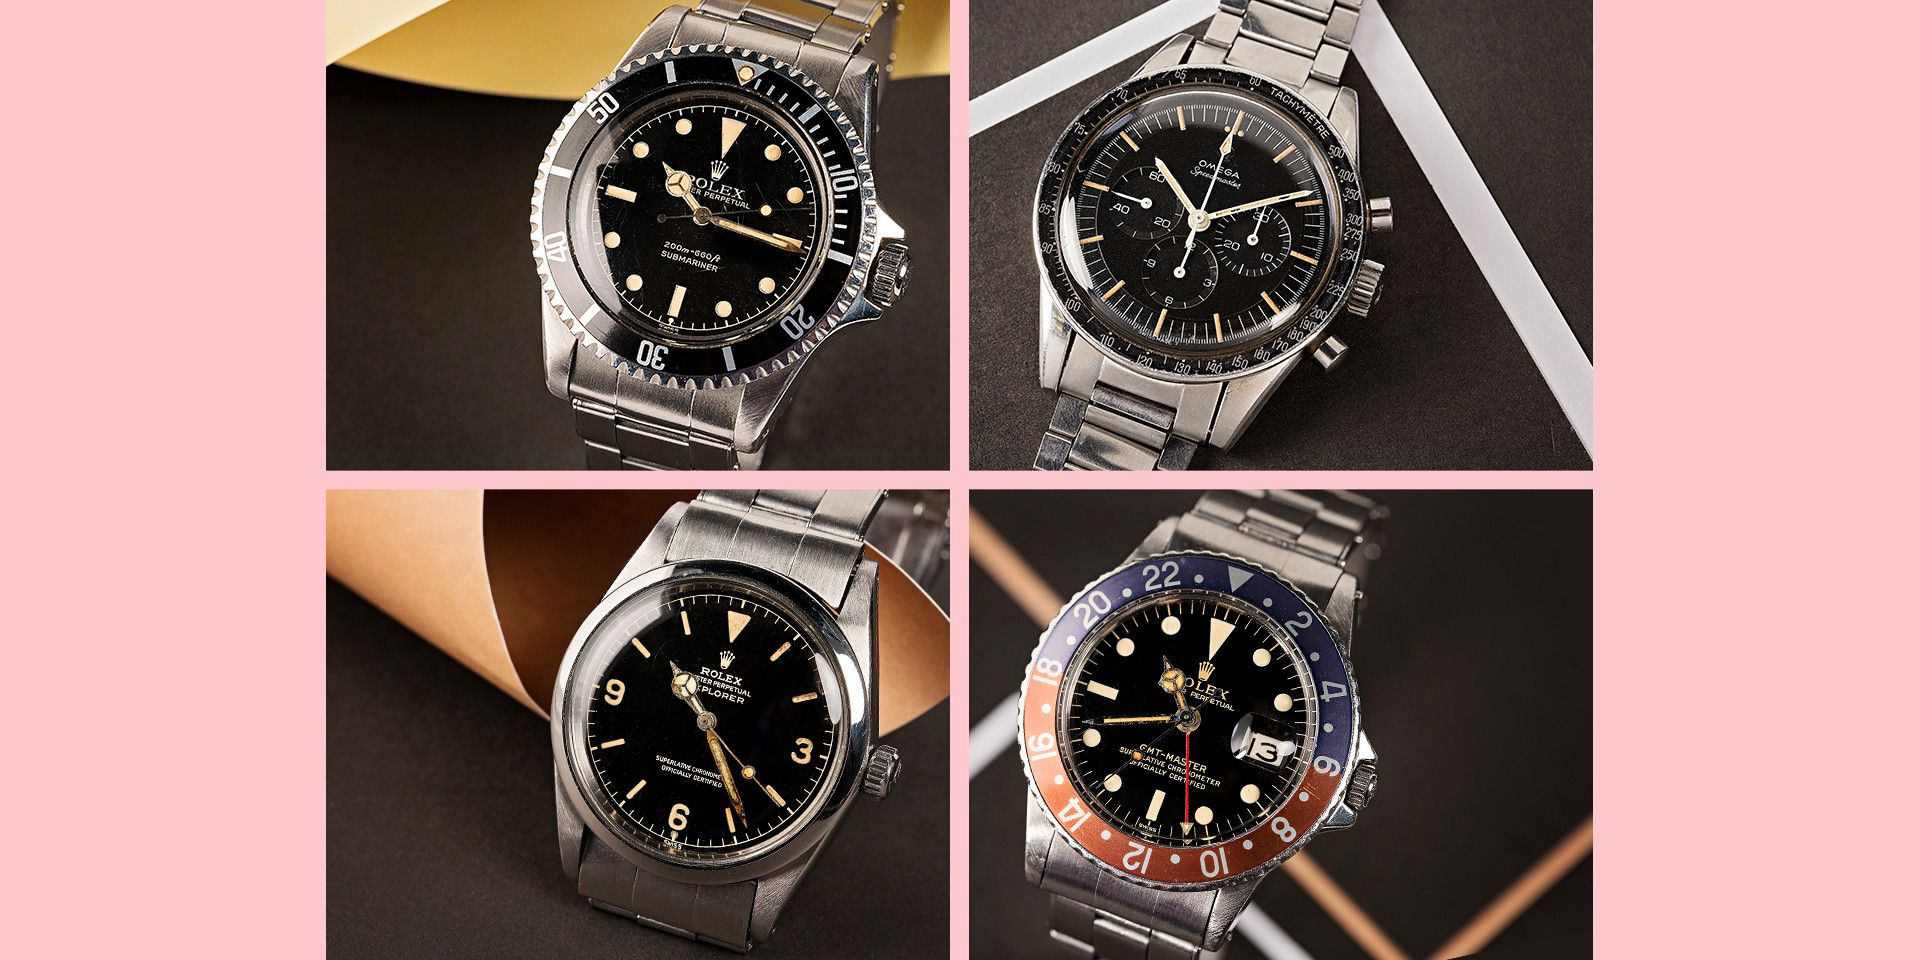 Buying Guide: The Best Seiko Watches From The 1960s